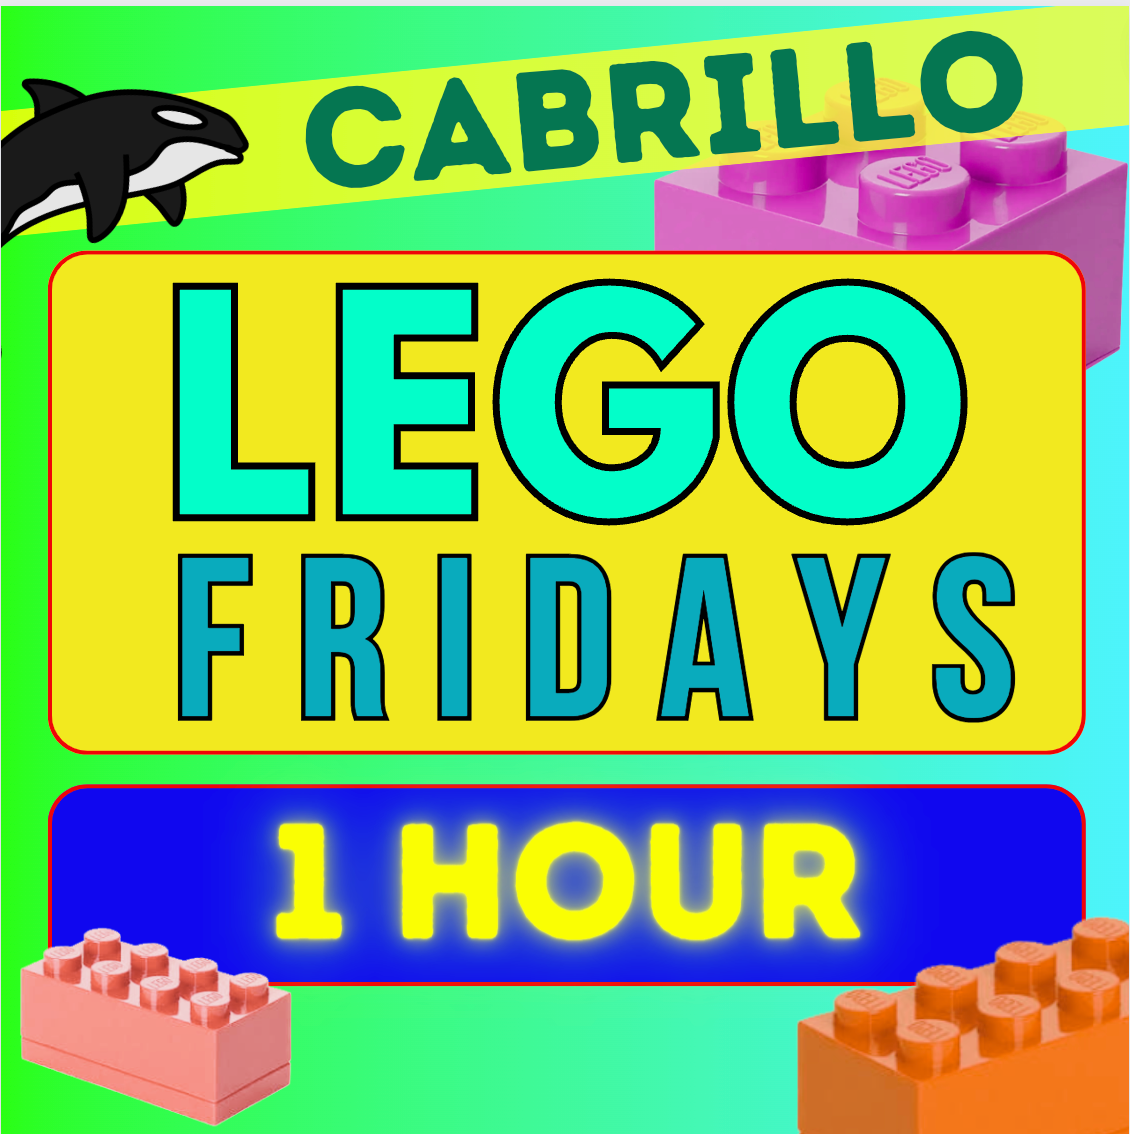 FRIDAY Cabrillo After School Lego Class